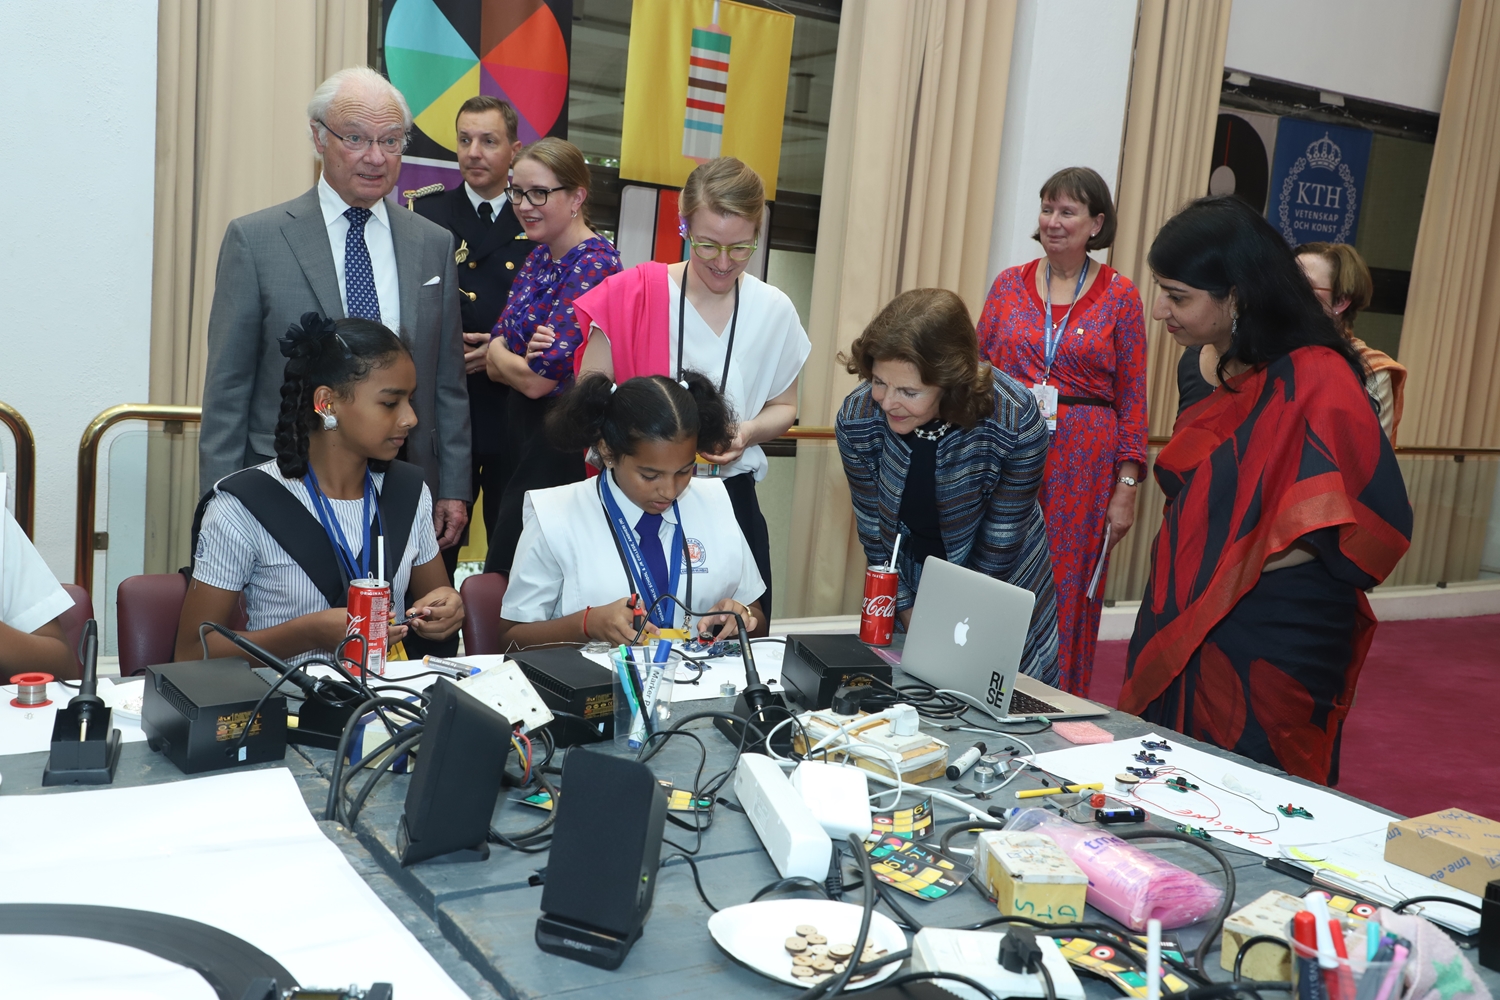  H.M. King Carl XVI Gustaf, Caroline Dahl and H.M. Queen Silvia watches as two girls experiment